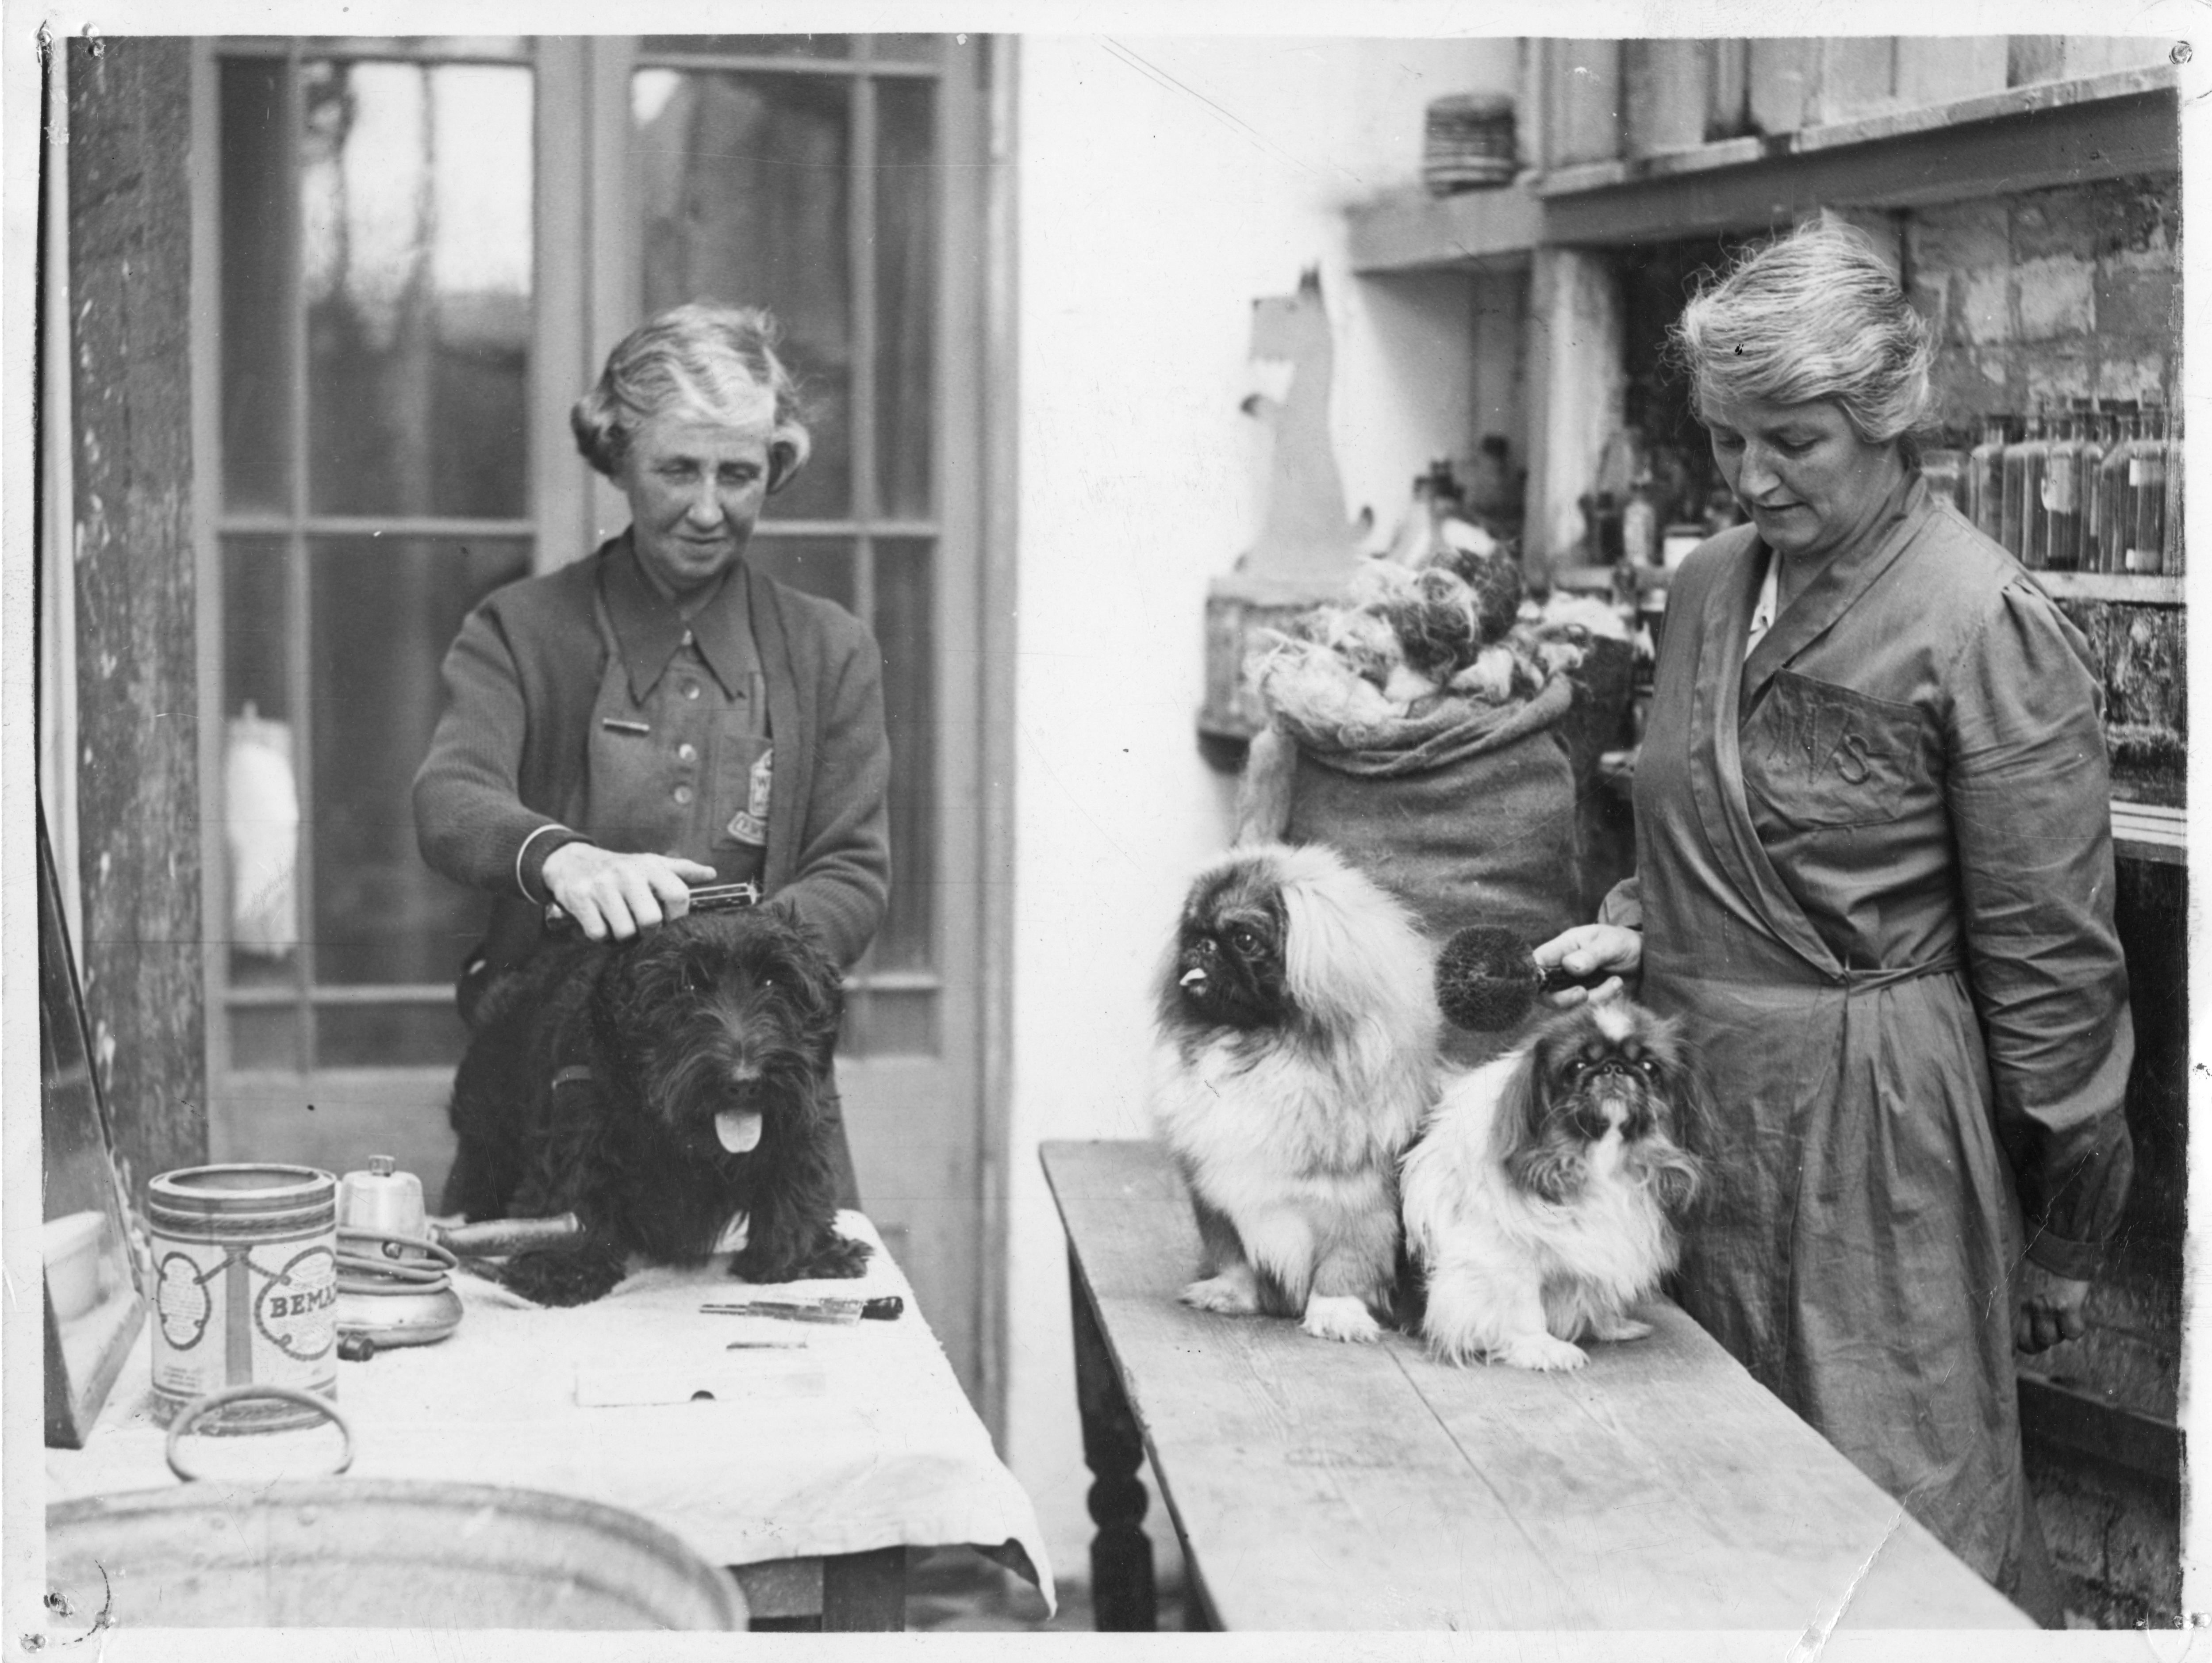 Two members of the WVS groom dogs to make clothing from animal hair during World War Two (Royal Voluntary Society/PA).